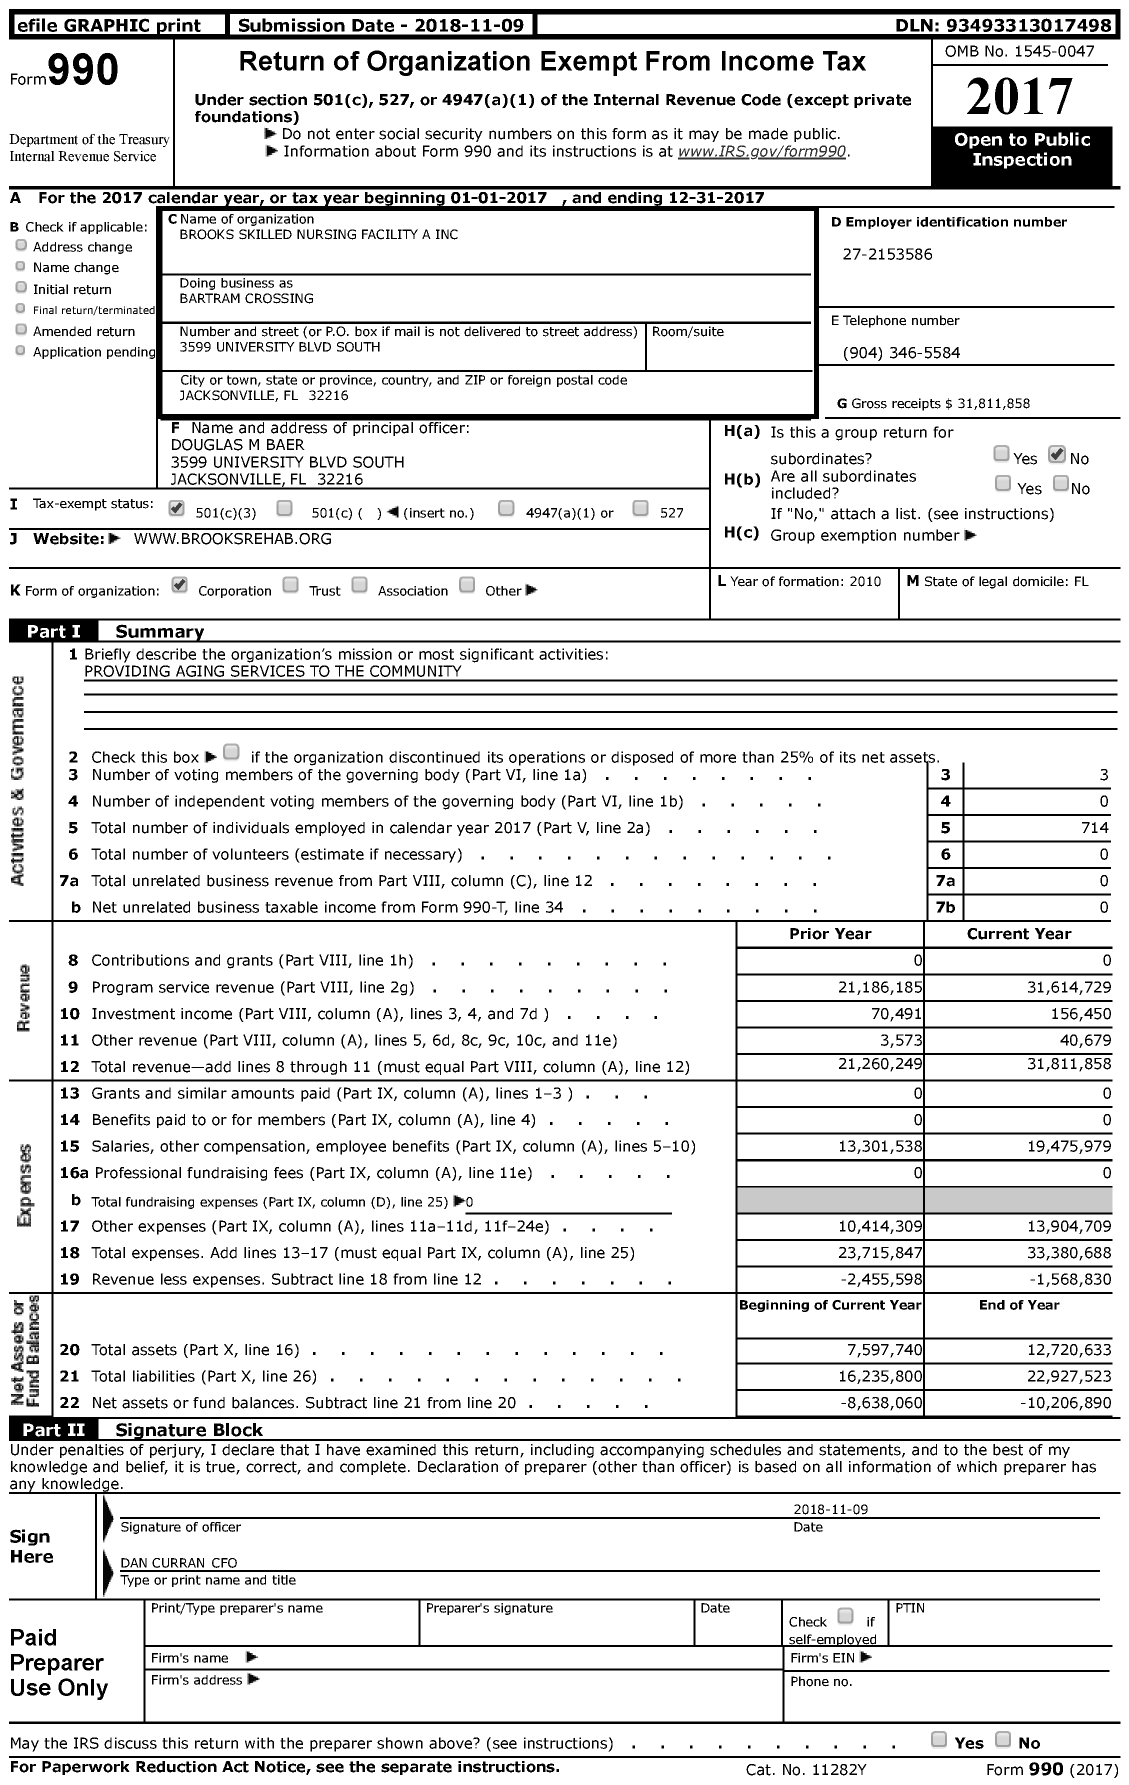 Image of first page of 2017 Form 990 for Bartram Crossing